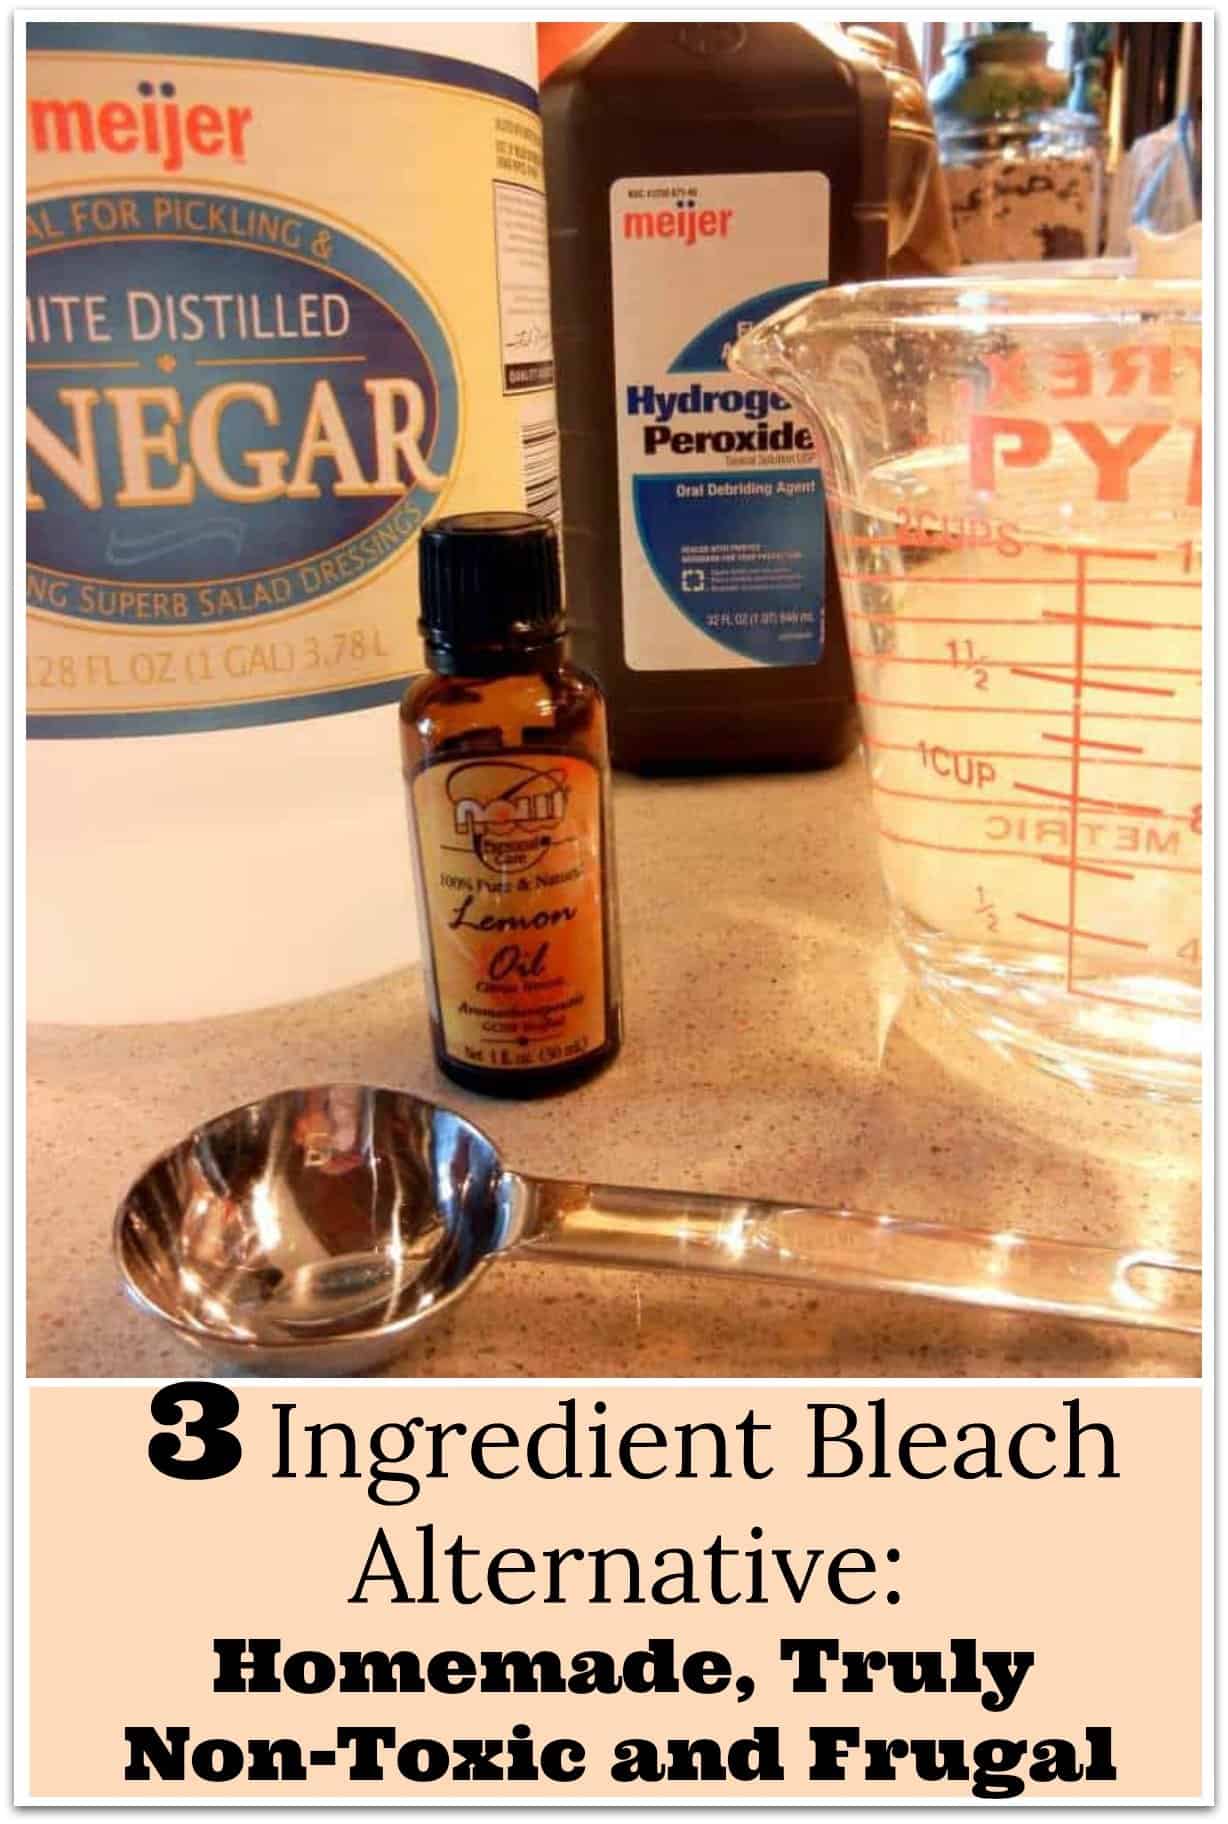 3 Ingredient Bleach Alternative: Homemade, Truly Non-Toxic and Frugal. DIY, safe 